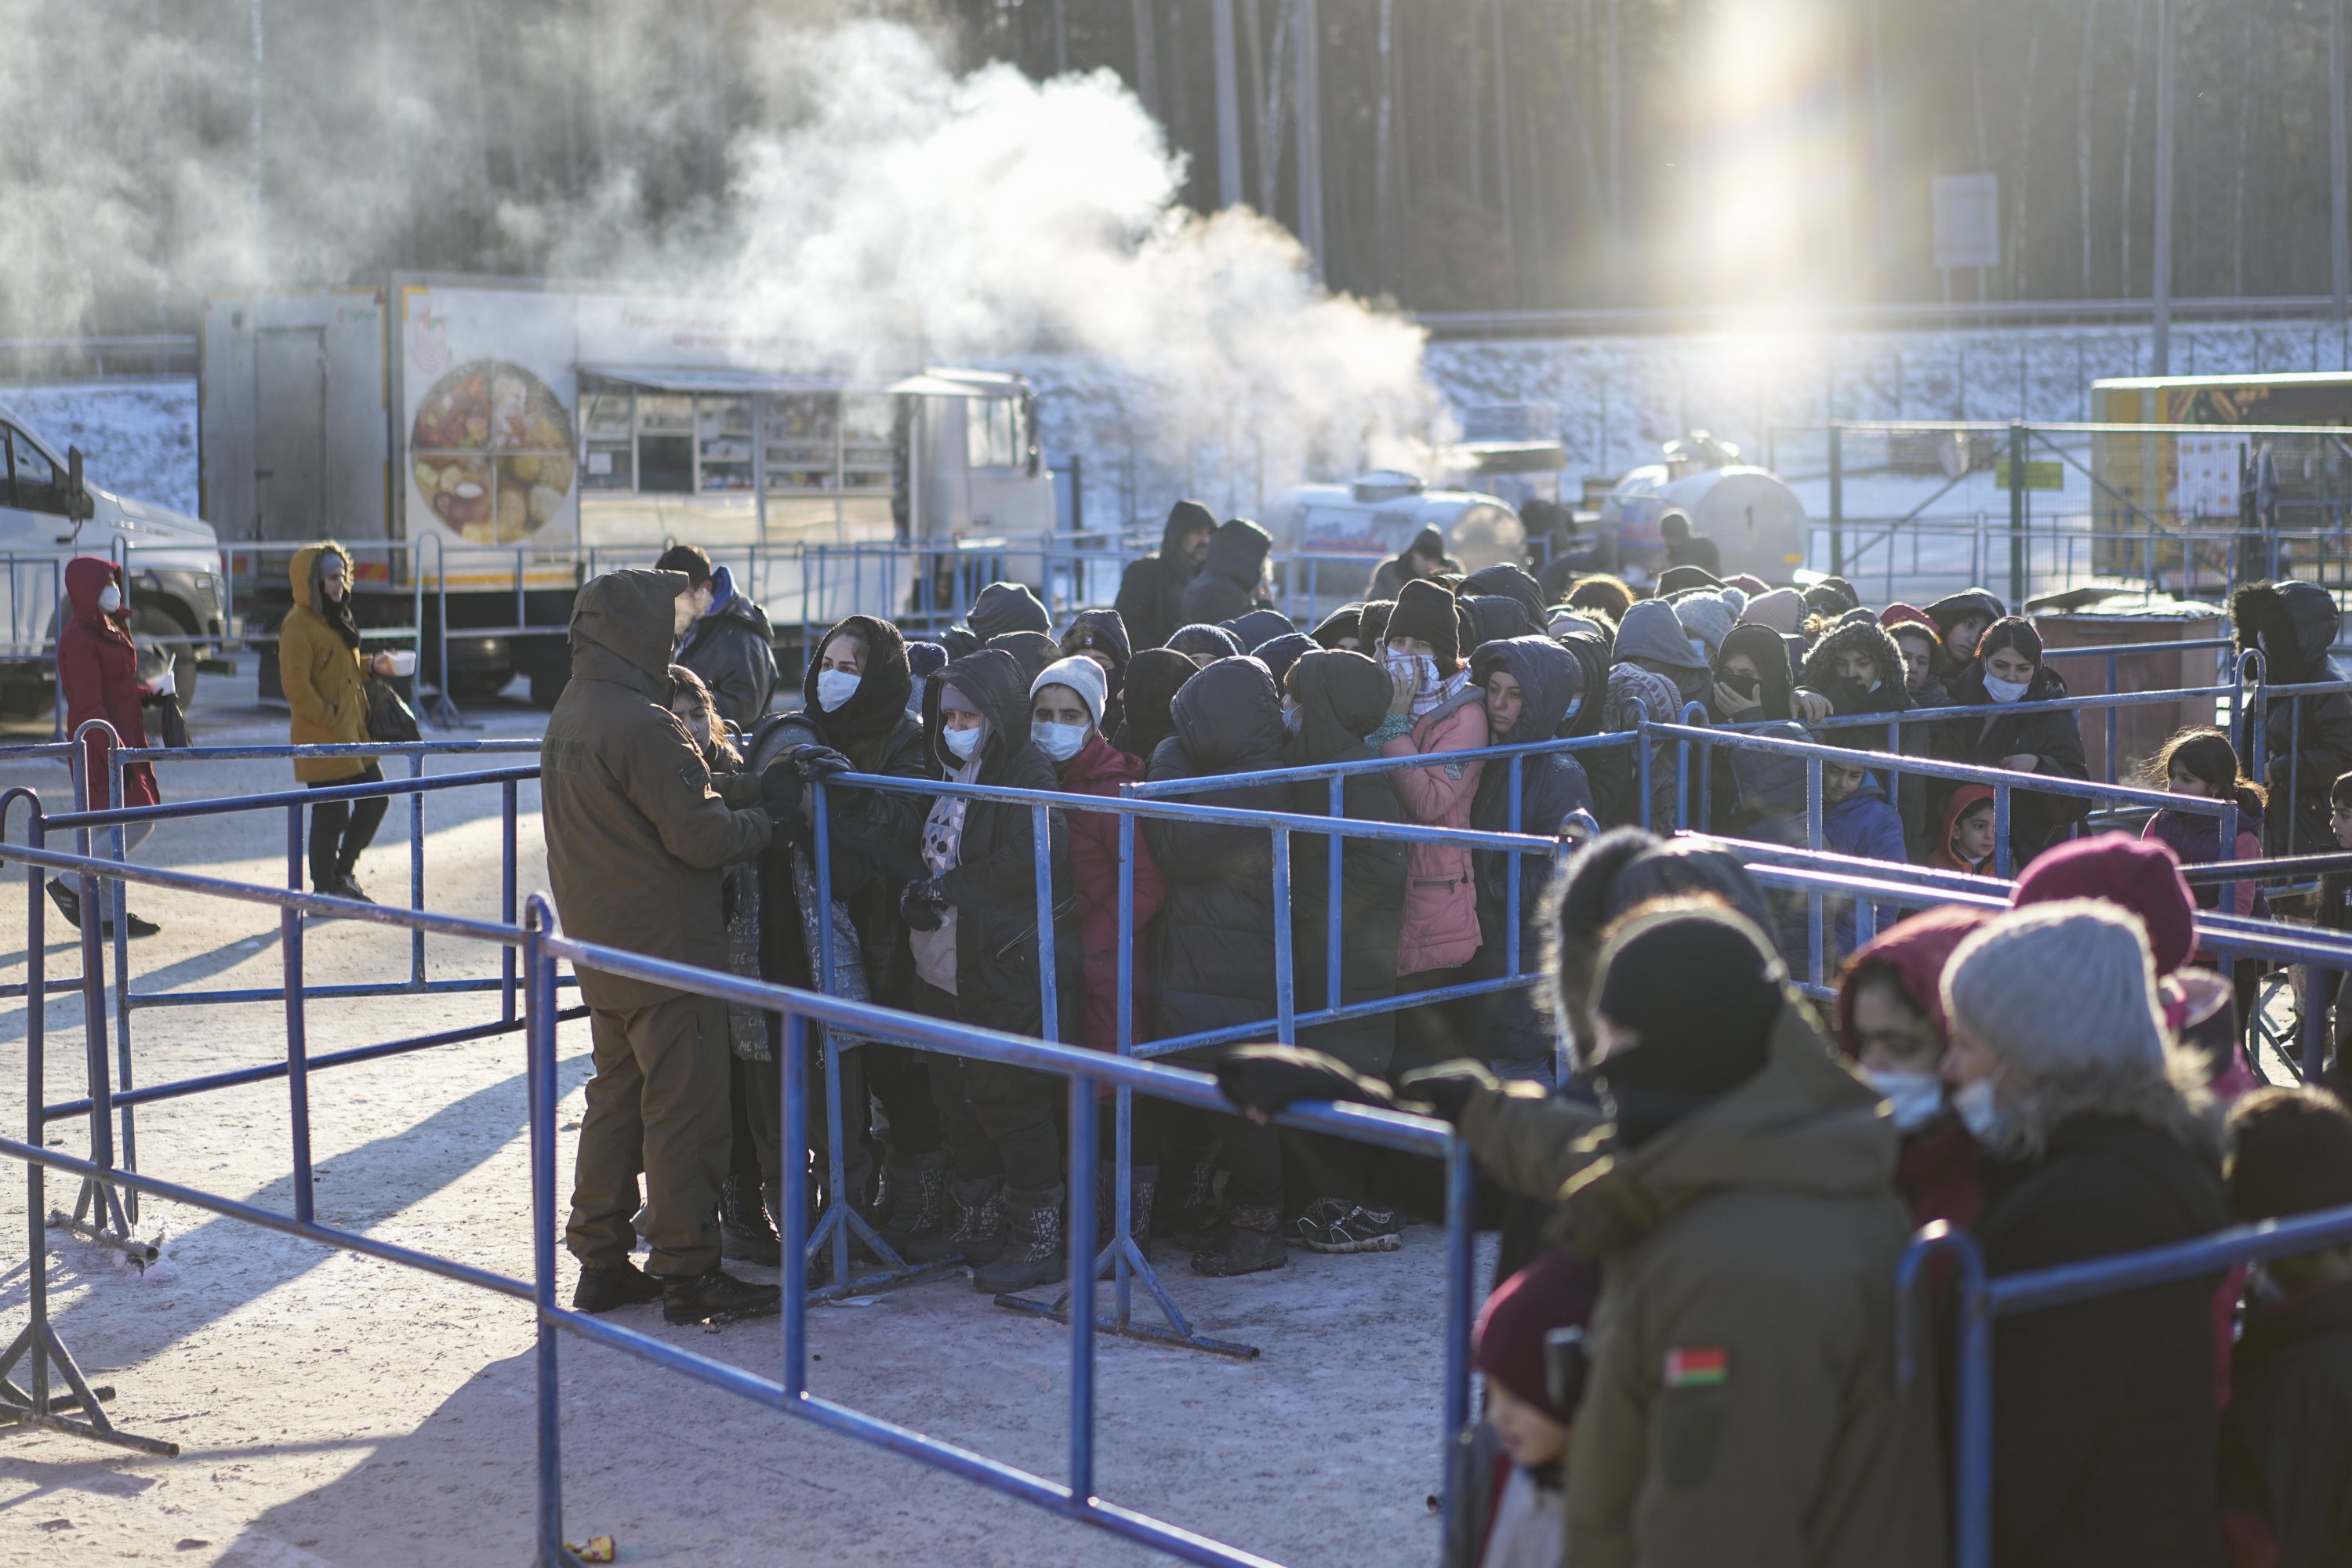 Migrants queue to receive hot food at the "Bruzgi" checkpoint logistics center at the Belarus-Poland border near Grodno, Belarus, Dec. 22, 2021.  (AP Photo)